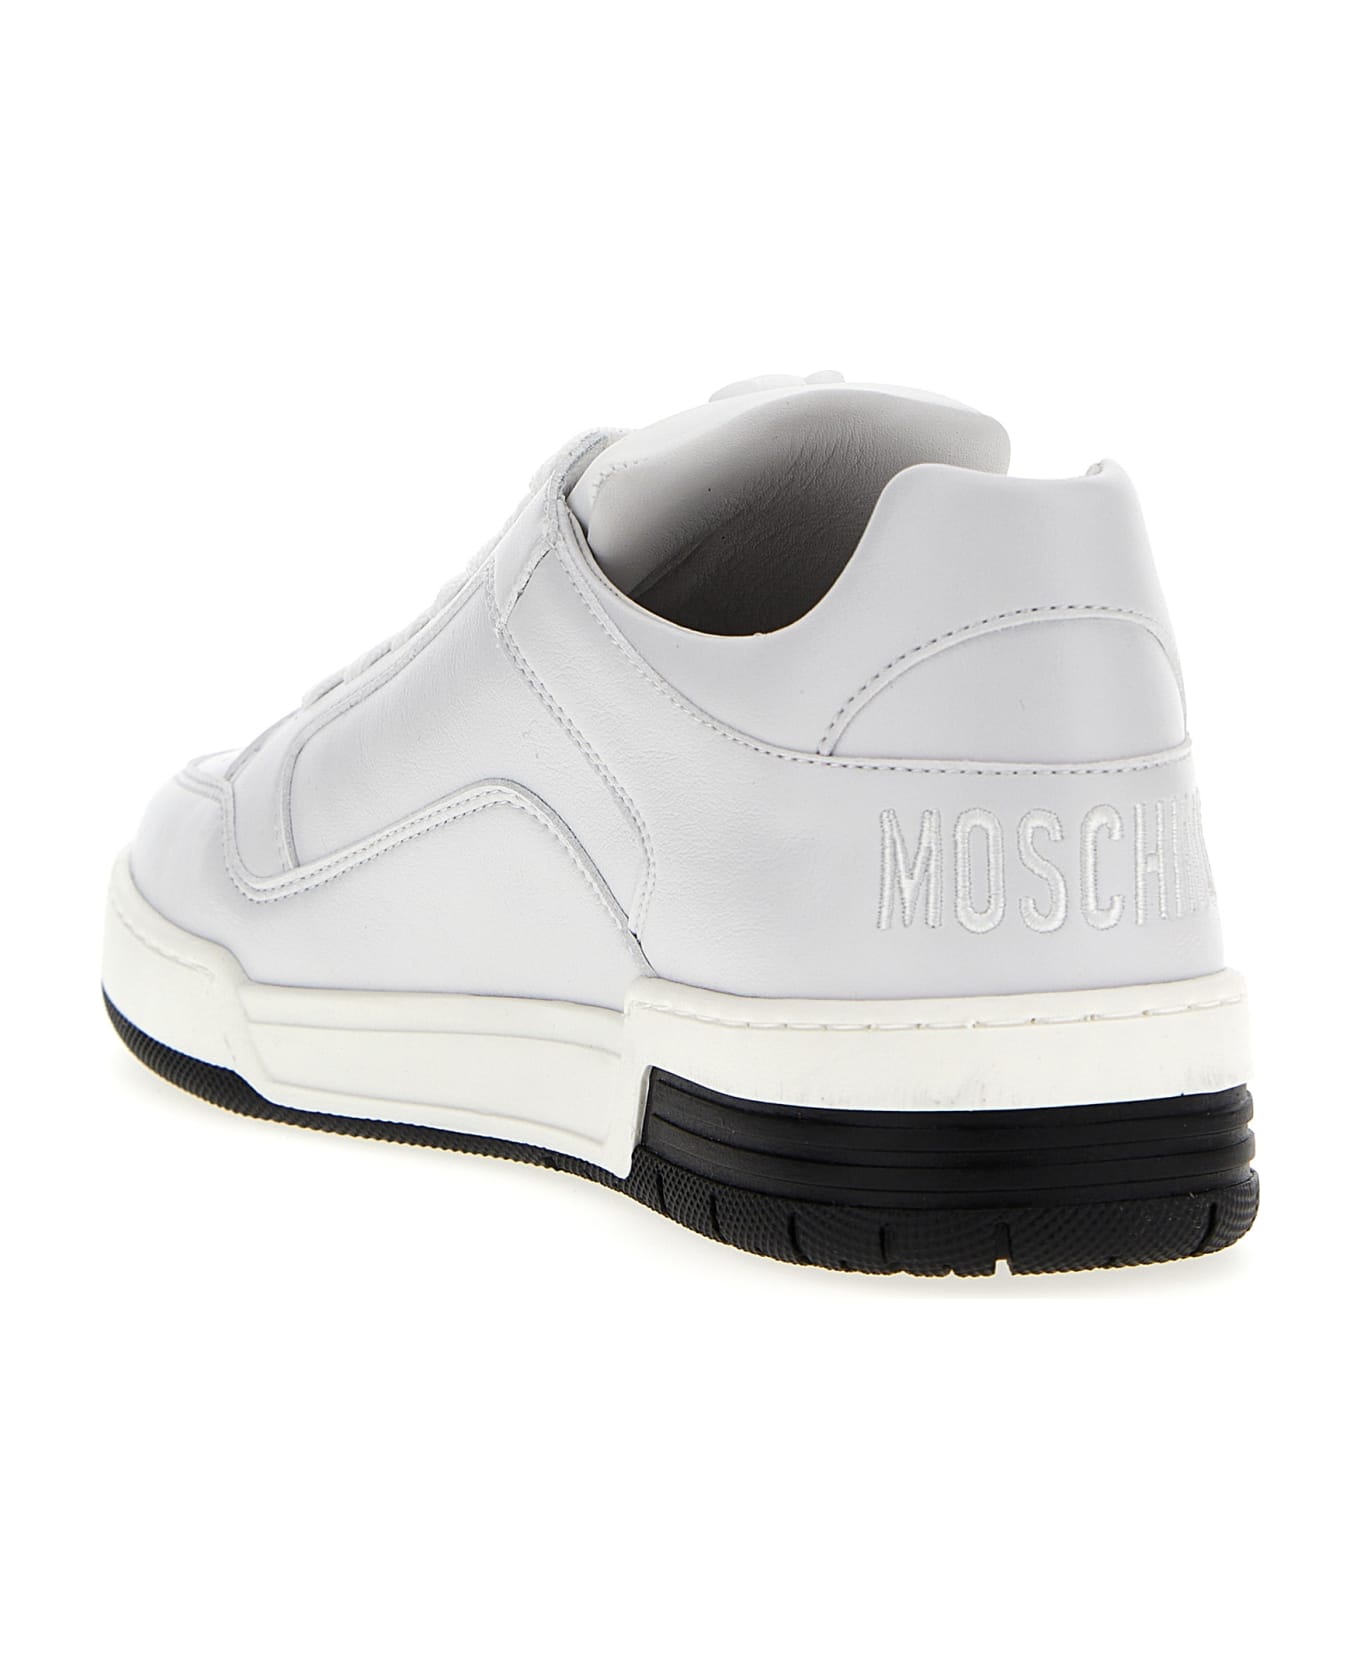 Moschino 'kevin' Sneakers - White スニーカー